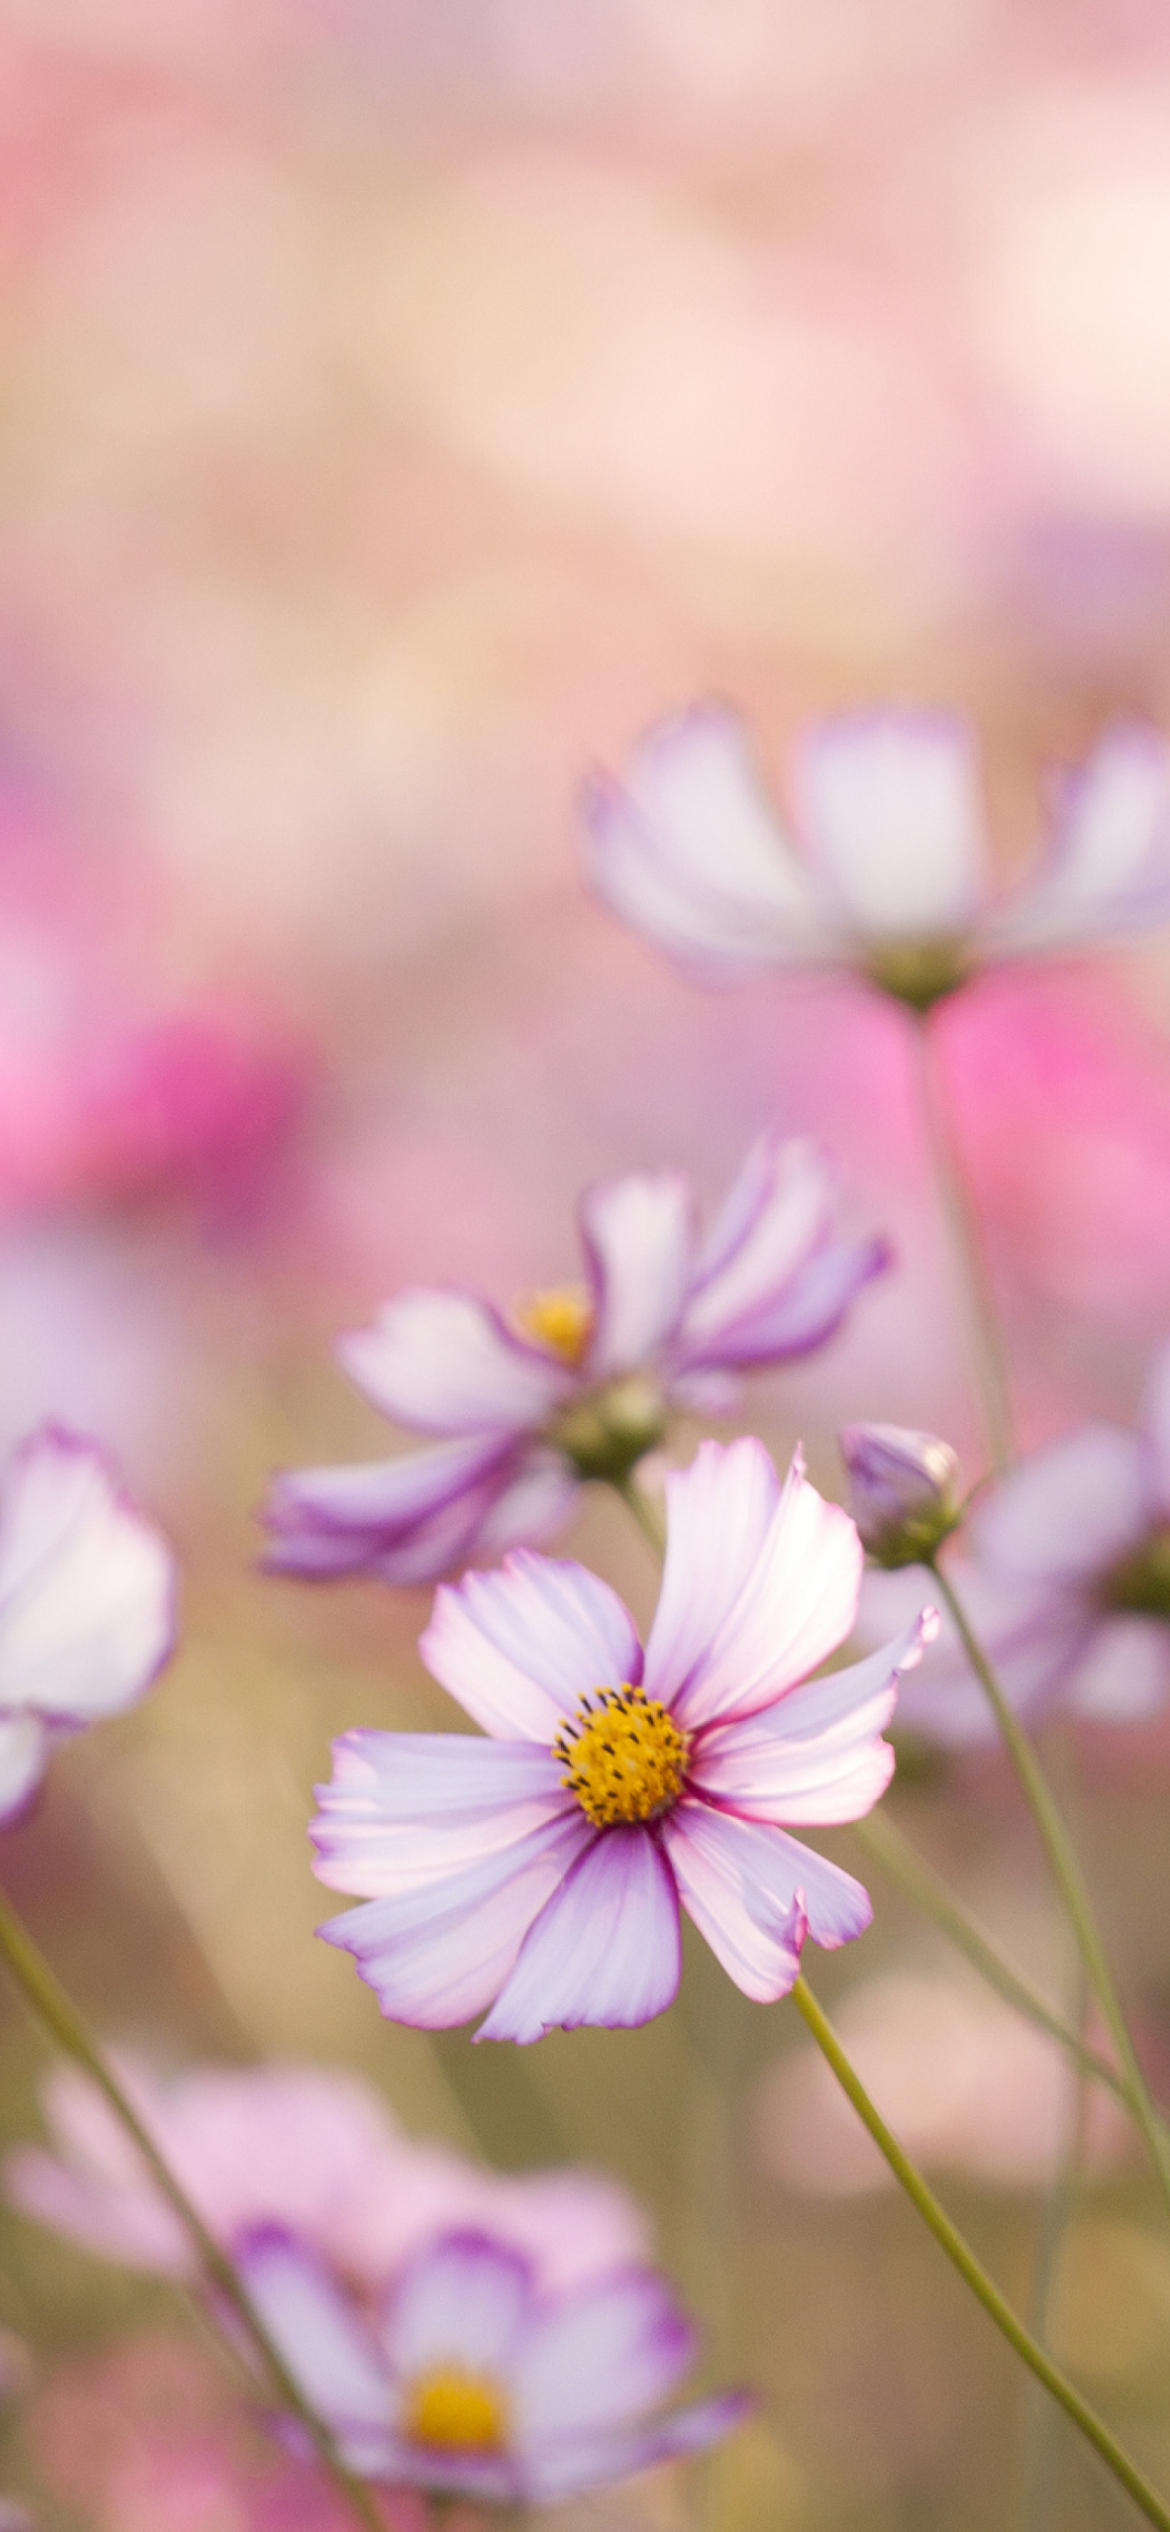 Обои Field Of White And Pink Petals 1170x2532